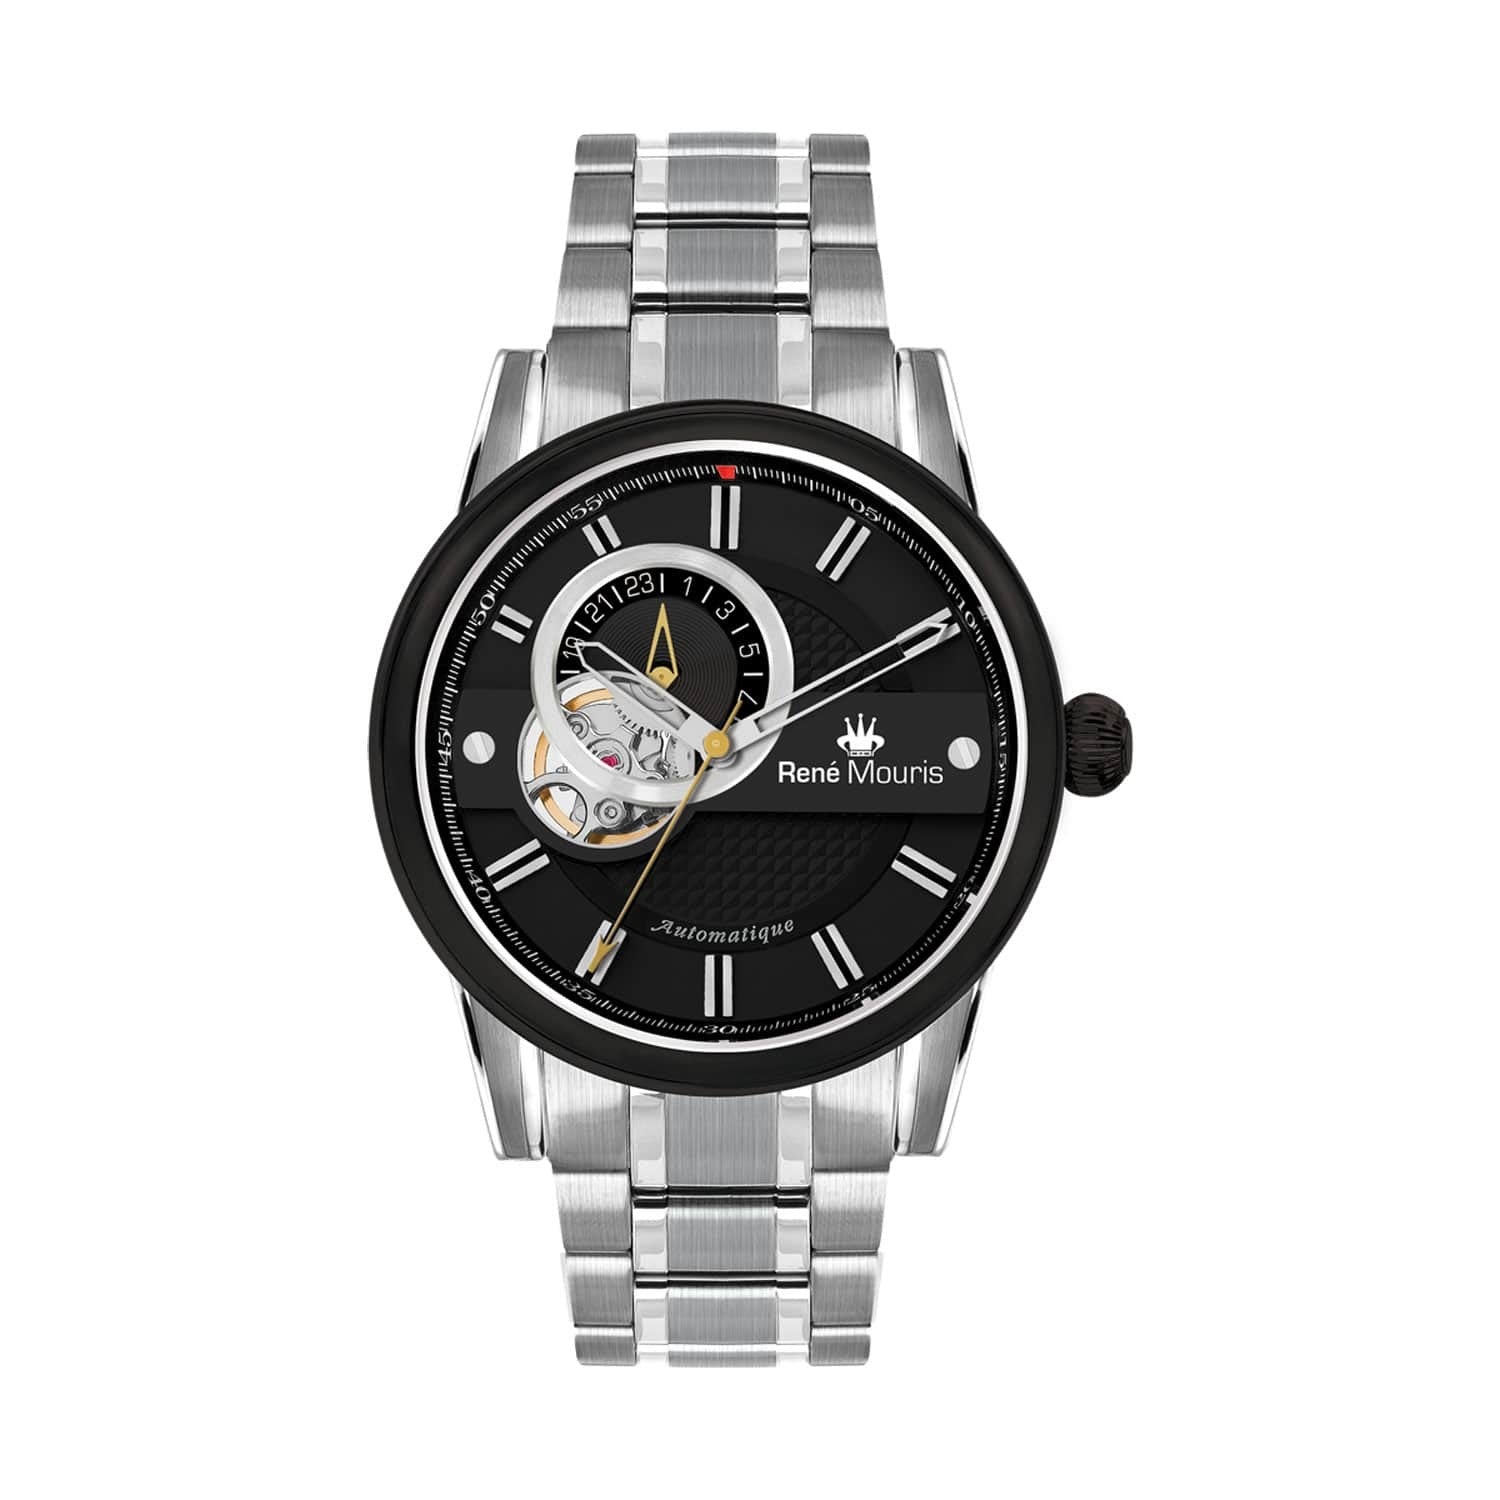 RENE MOURIS Orion Series Automatic Watch Gents